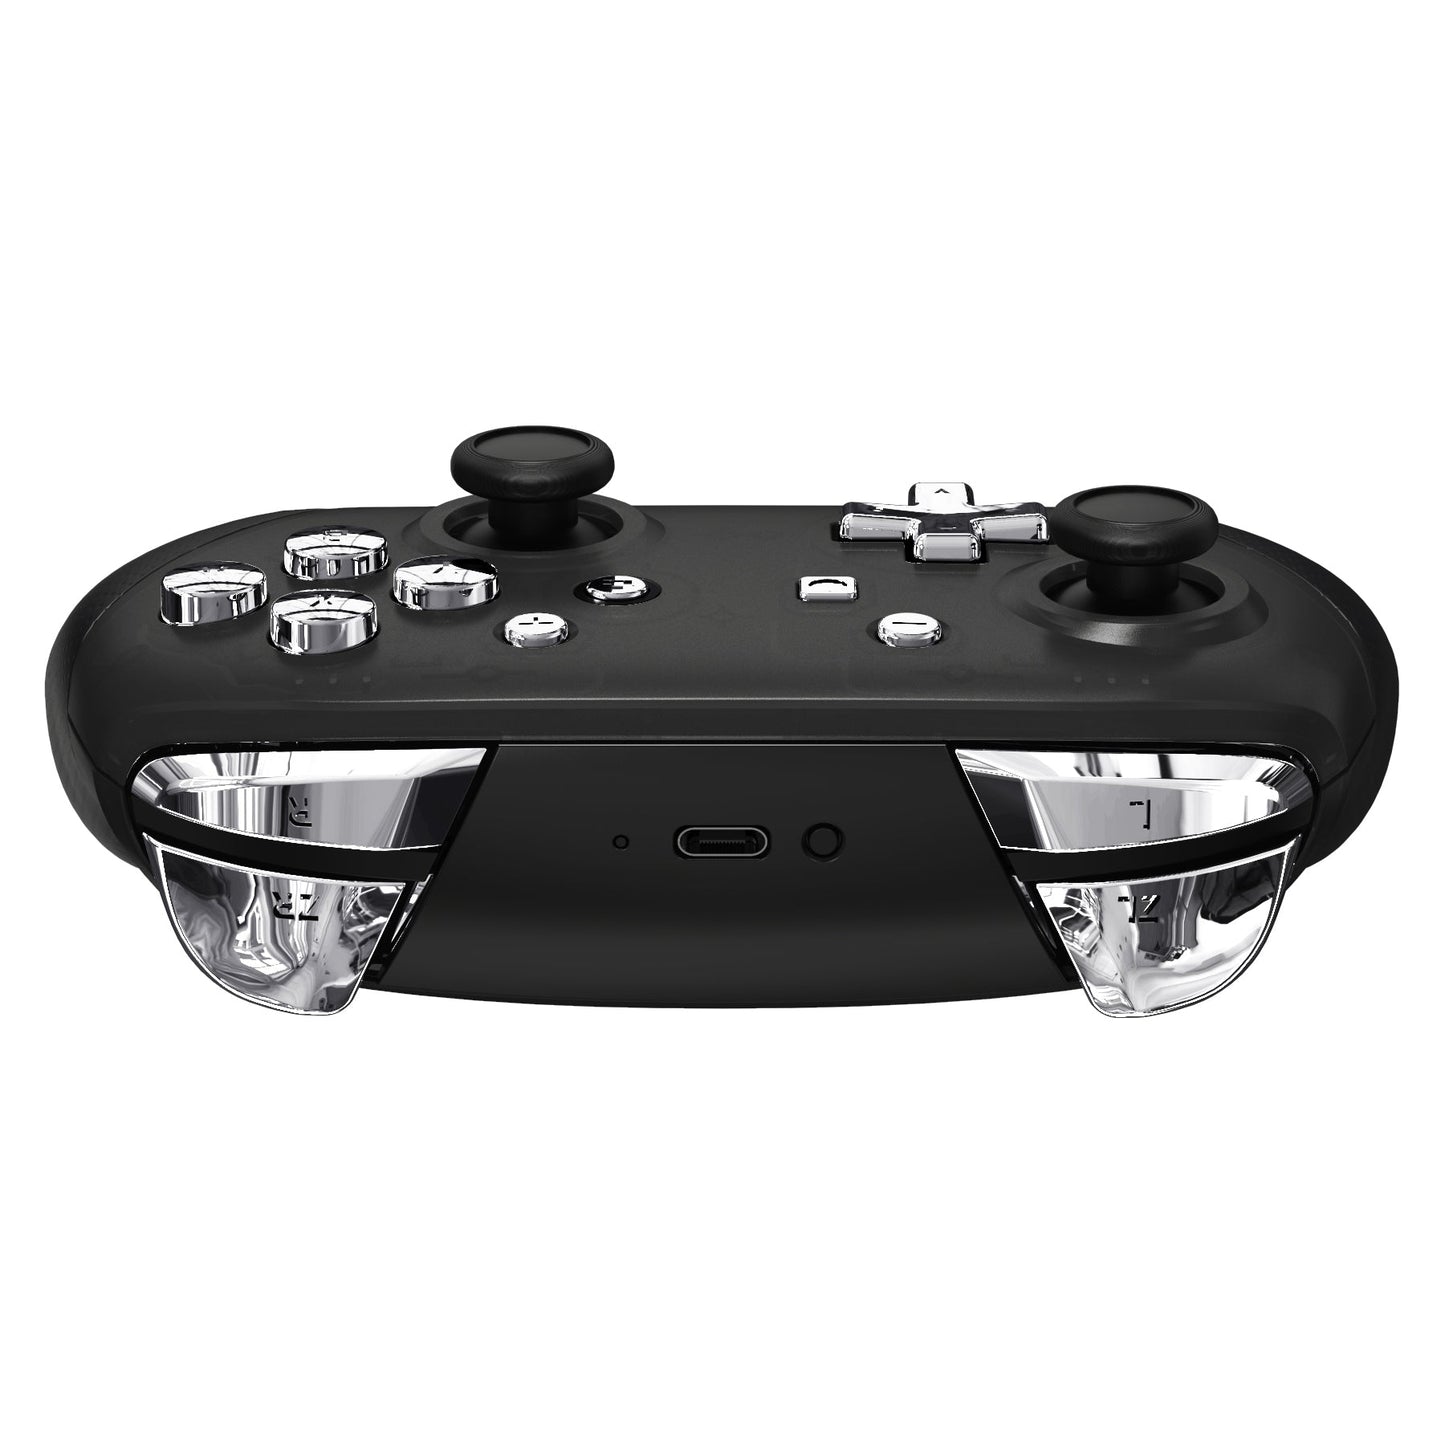 eXtremeRate Retail Chrome Silver Repair ABXY D-pad ZR ZL L R Keys for NS Switch Pro Controller, Glossy DIY Replacement Full Set Buttons with Tools for NS Switch Pro - Controller NOT Included - KRD402